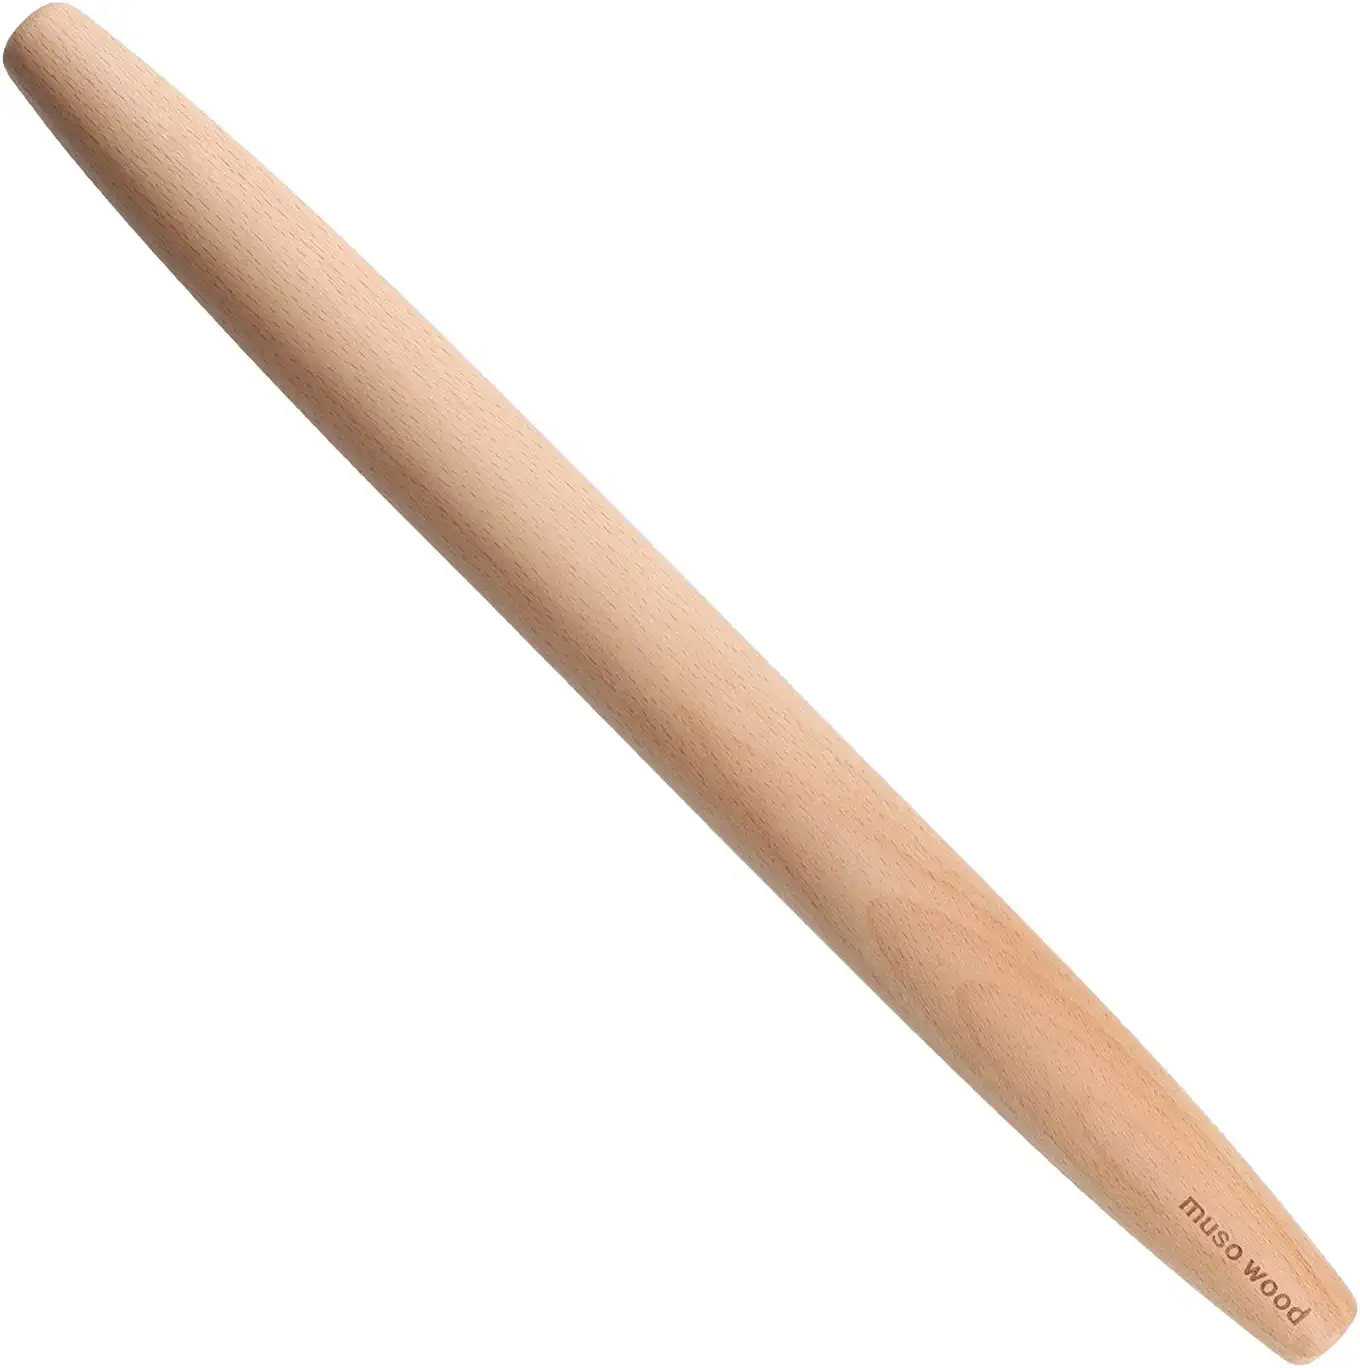 https://www.dontwasteyourmoney.com/wp-content/uploads/2022/09/muso-wood-crack-resistant-tapered-rolling-pin-rolling-pin.webp